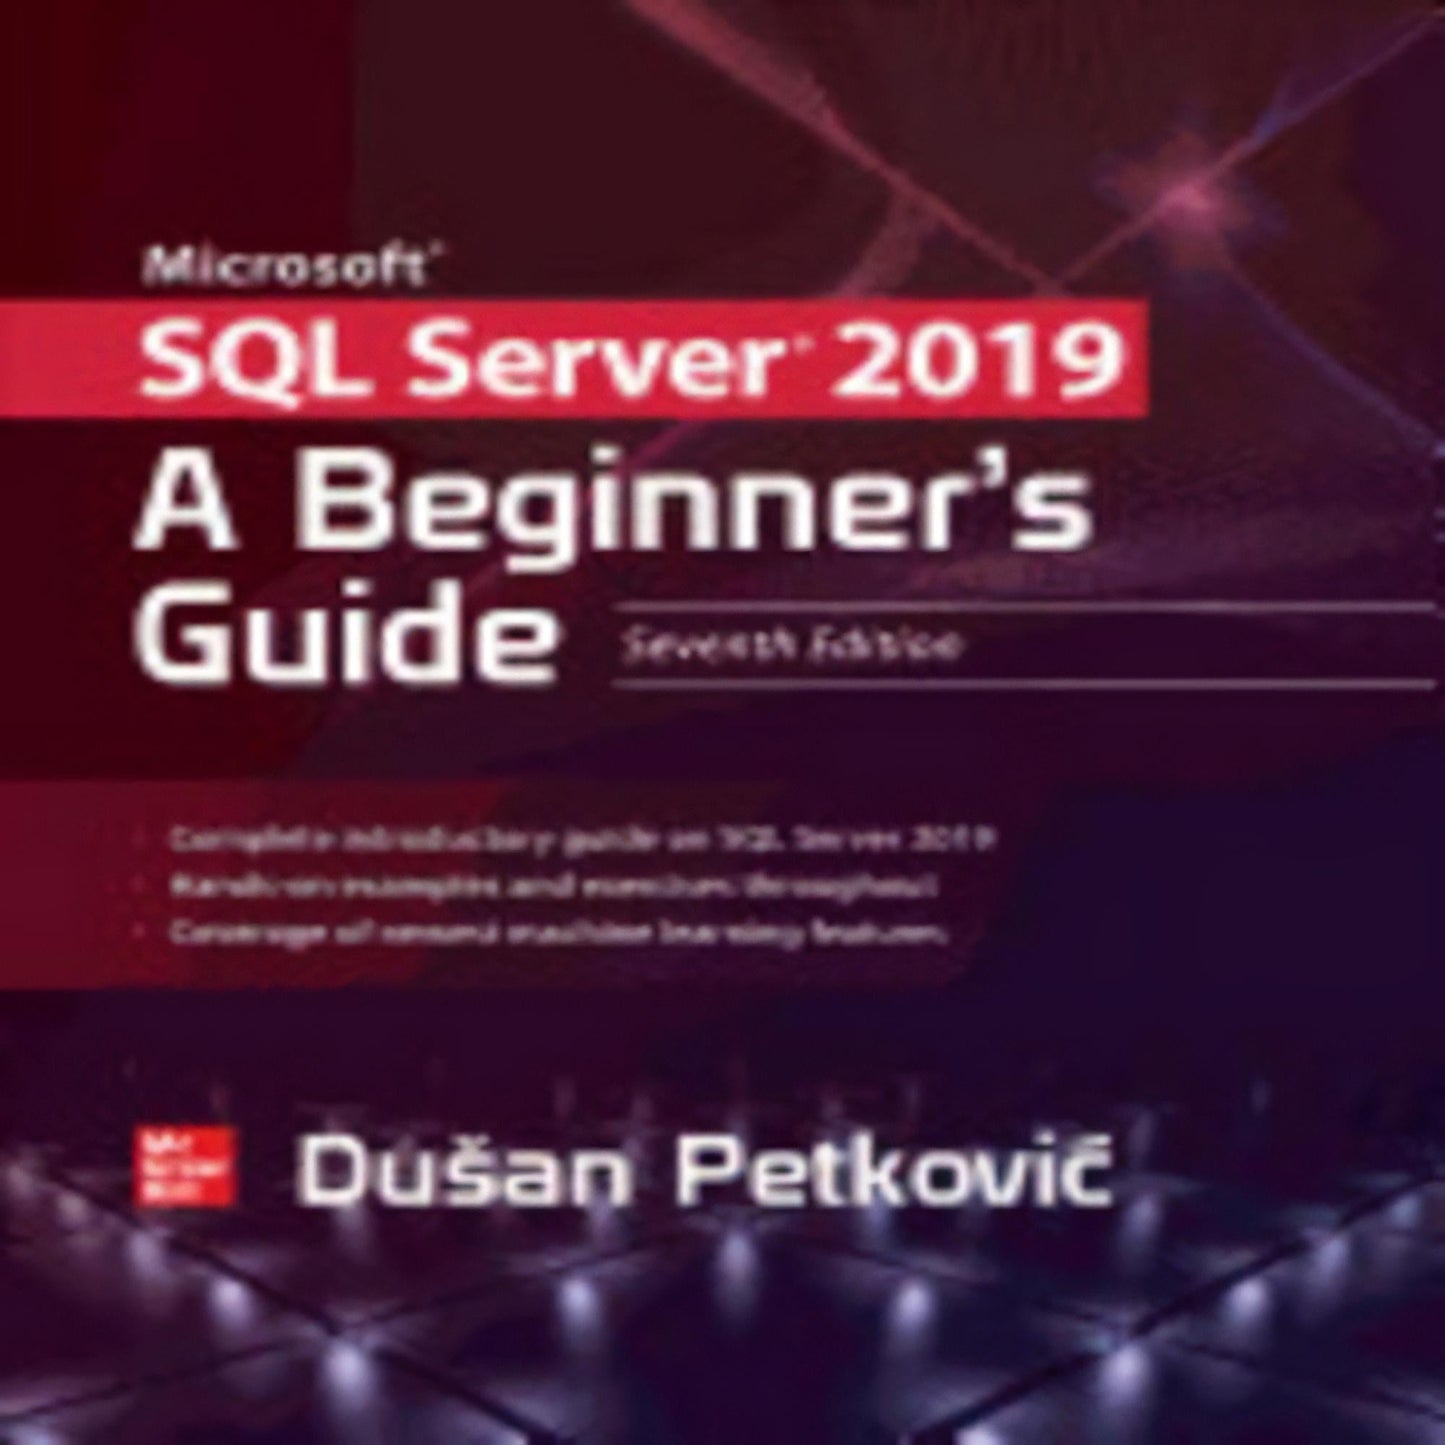 TEXTBOOK Microsoft SQL Server 2019: A Beginner's Guide, Seventh Edition (7TH ed.)272-050623-9781260458879DPGBOOKSTORE.COM. Today's Bestsellers.